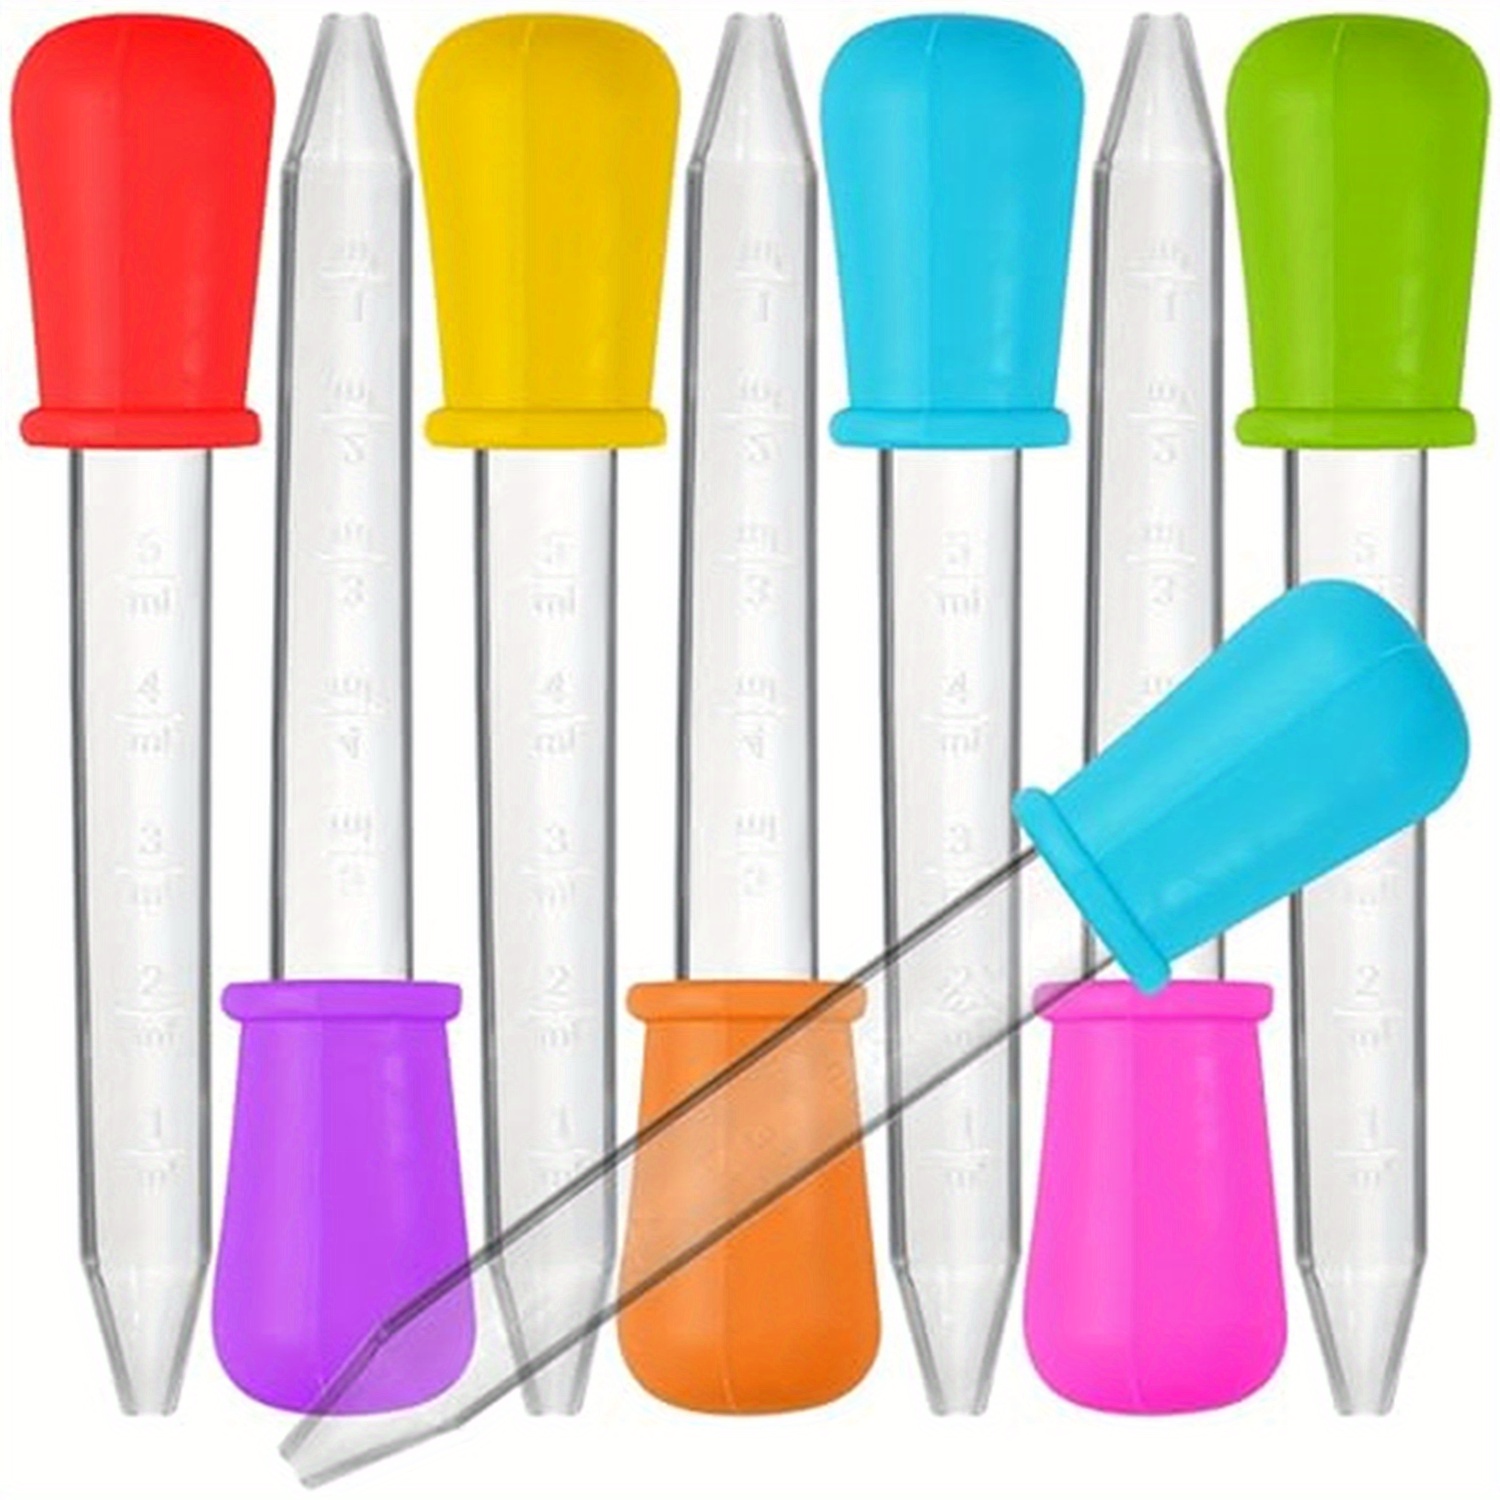 

8pcs/pack Liquid Droppers, Senhai Silicone And Plastic Pipettes Transfer Eyedropper With Bulb Tip For Candy Oil Kitchen Gummy Making - 7 Colors